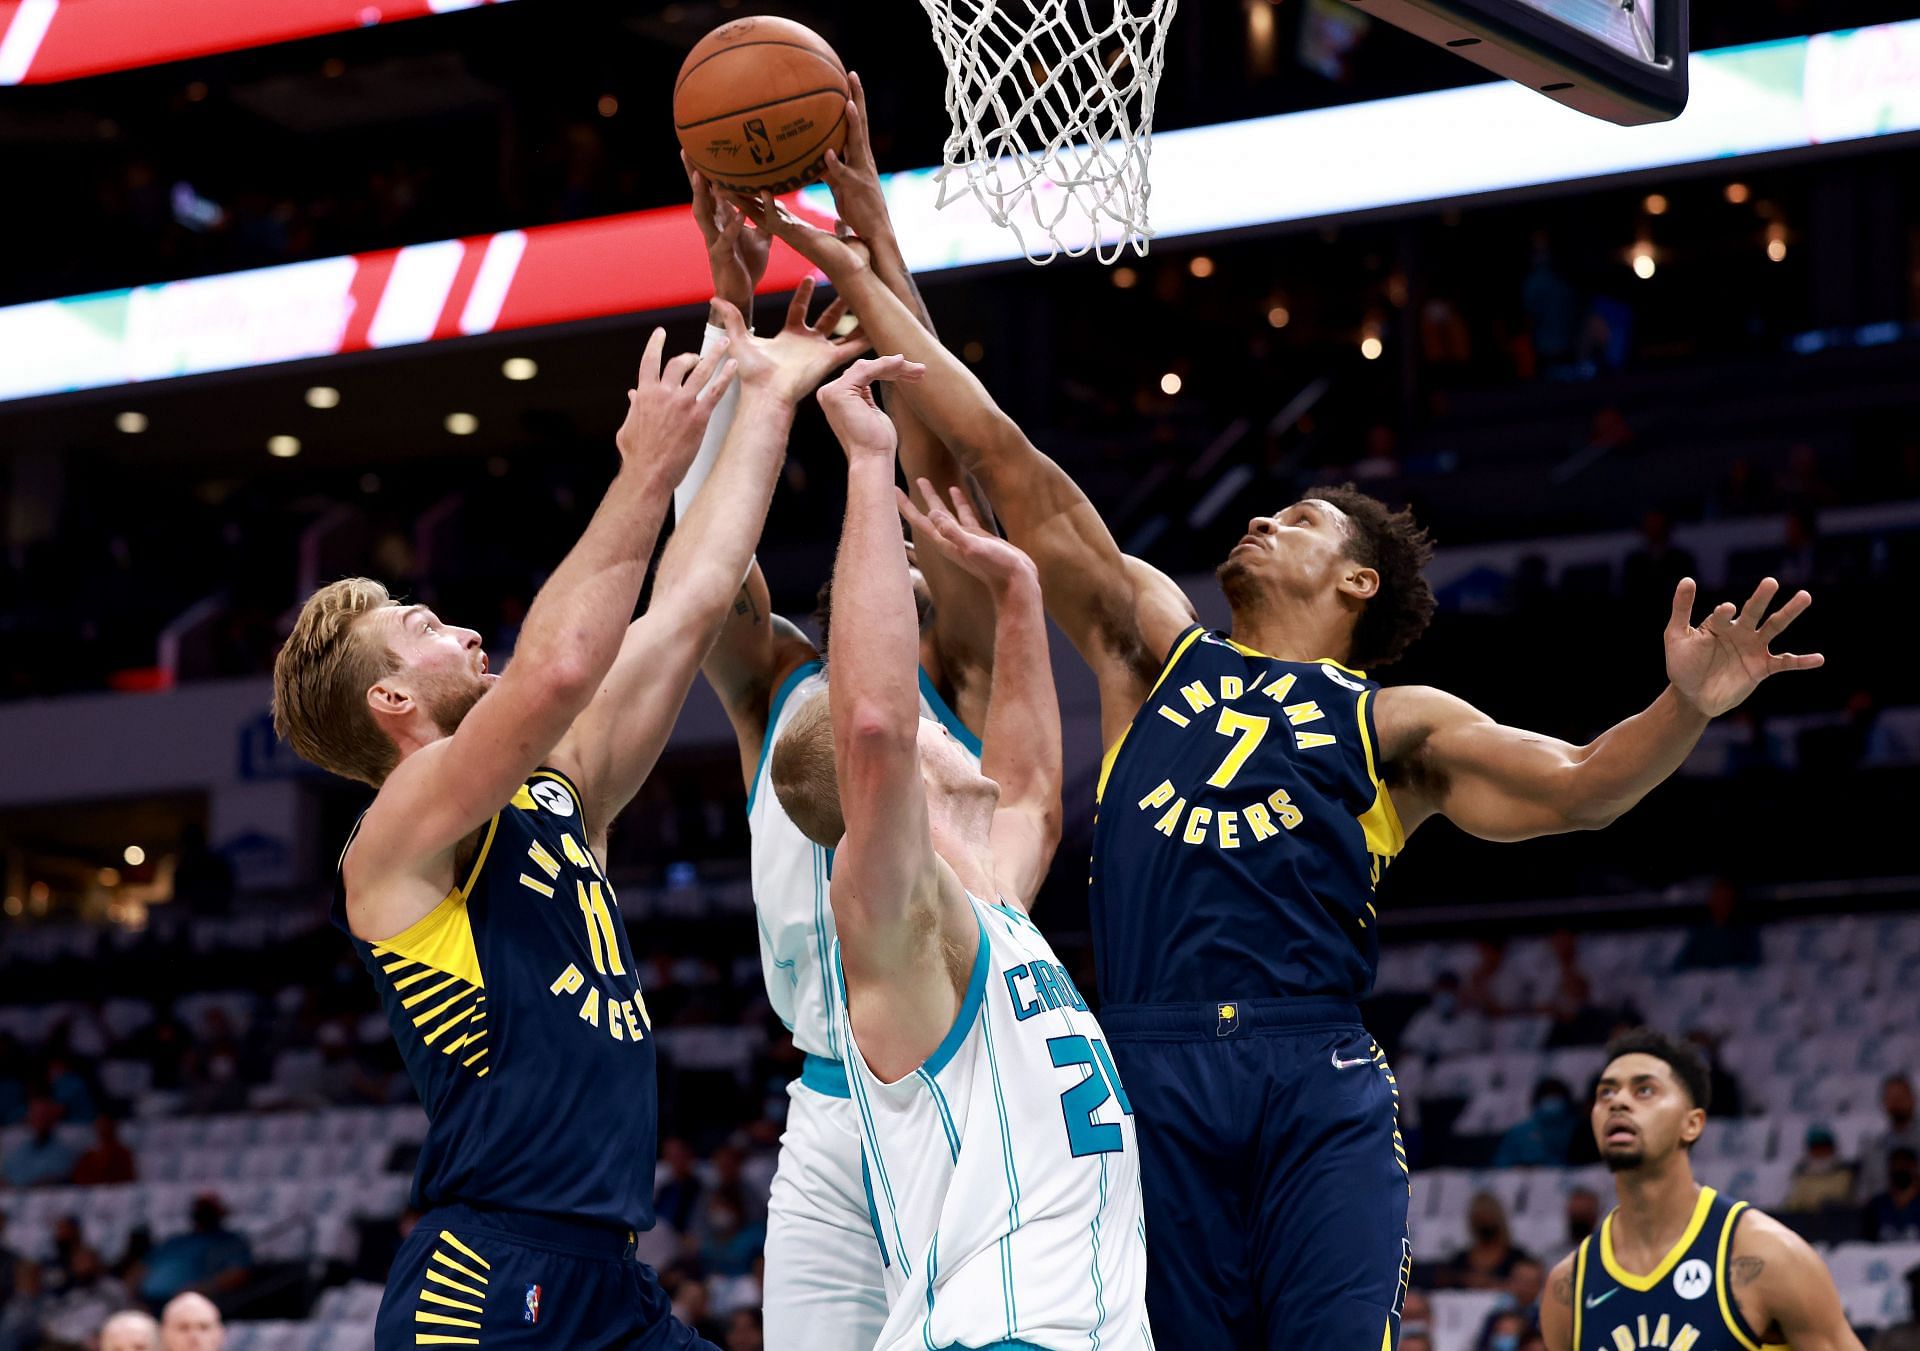 Domantas Sabonis #11 and Malcolm Brogdon #7 of the Indiana Pacers battle Mason Plumlee #24 and Miles Bridges #0 of the Charlotte Hornets for a rebound during the first half of their game at Spectrum Center on October 20, 2021 in Charlotte, North Carolina.